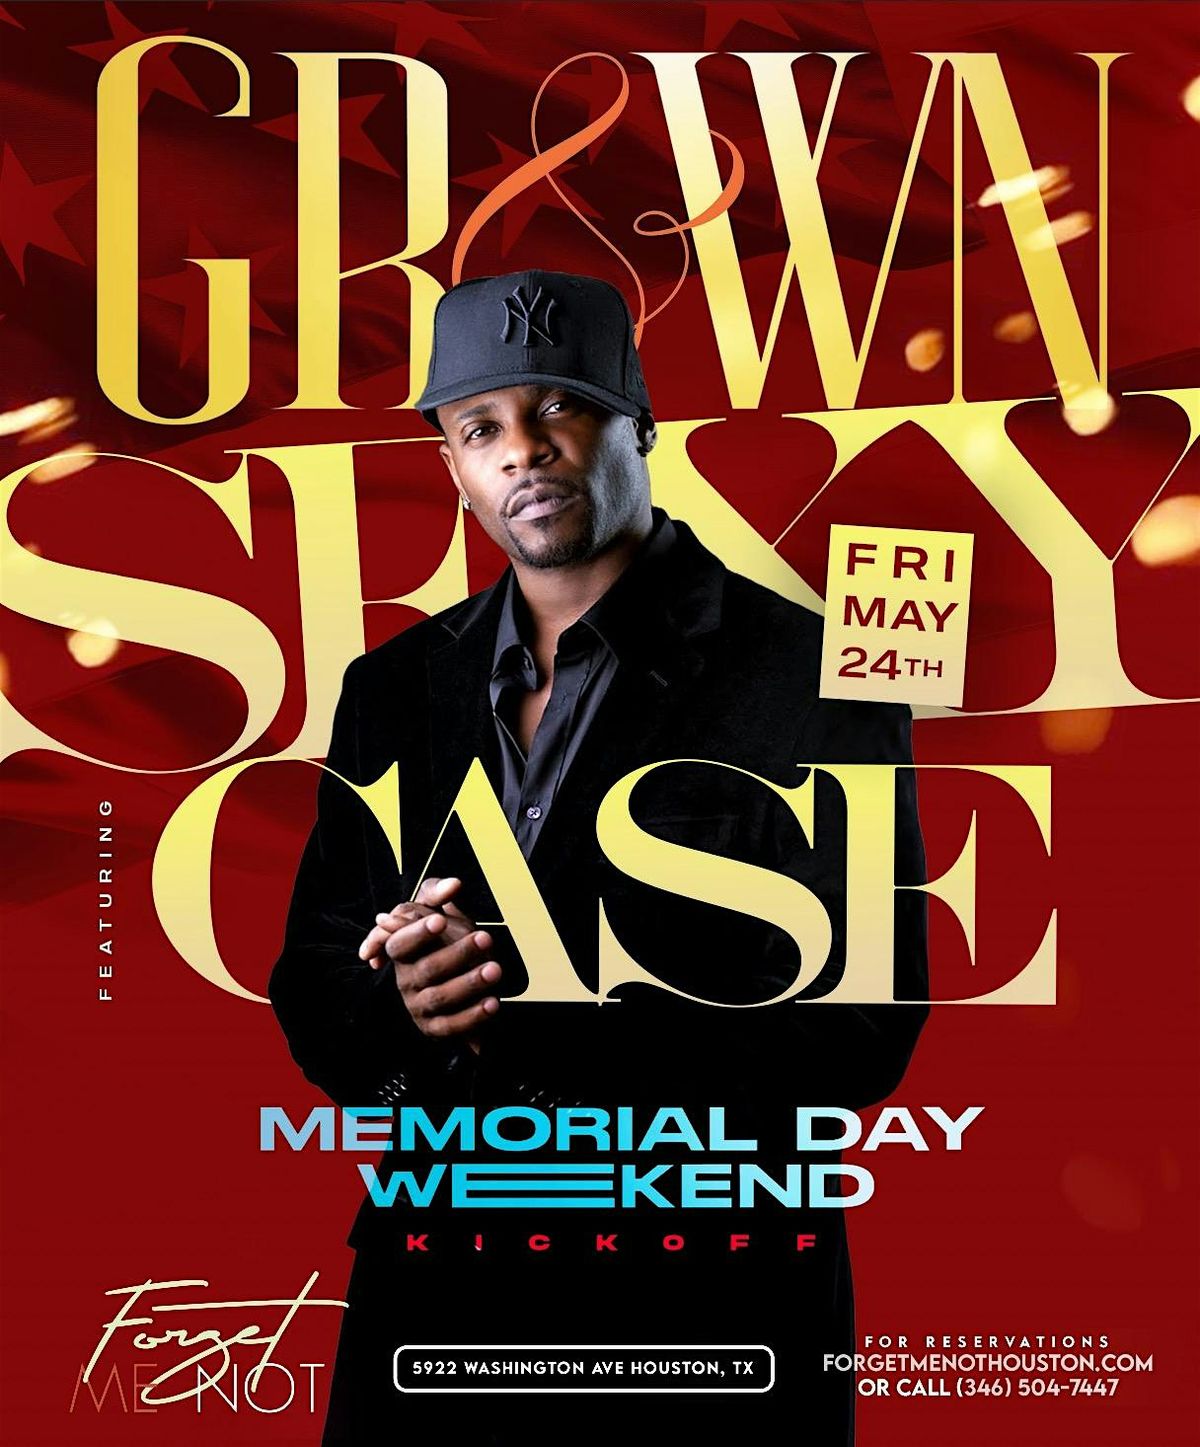 Memorial Day Weekend Kickoff at Forget Me Not featuring Case  Friday May 24